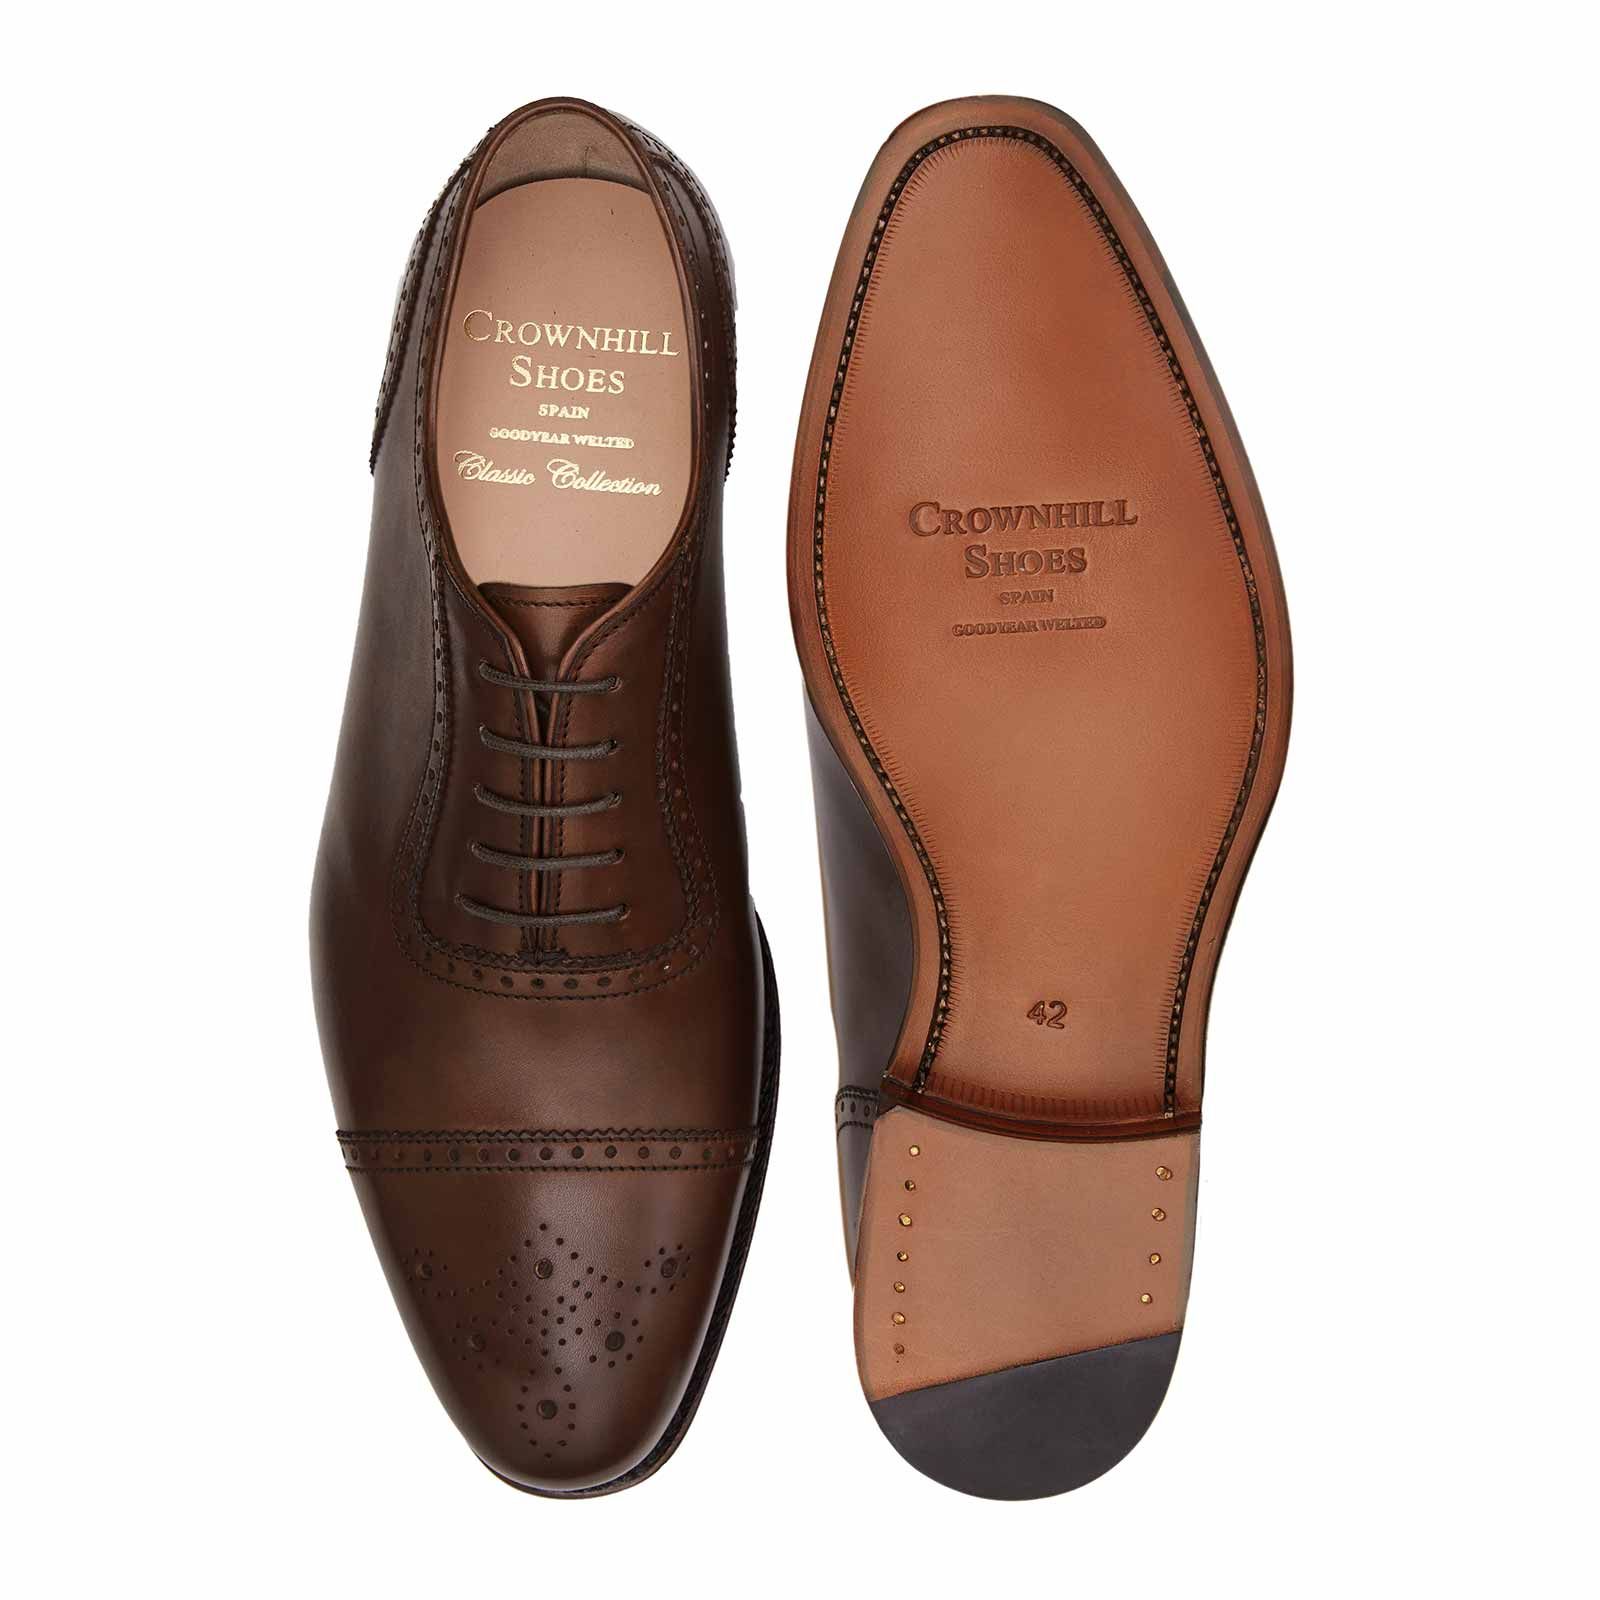 The New Reims: Brown legate oxford shoe | Crownhill Shoes